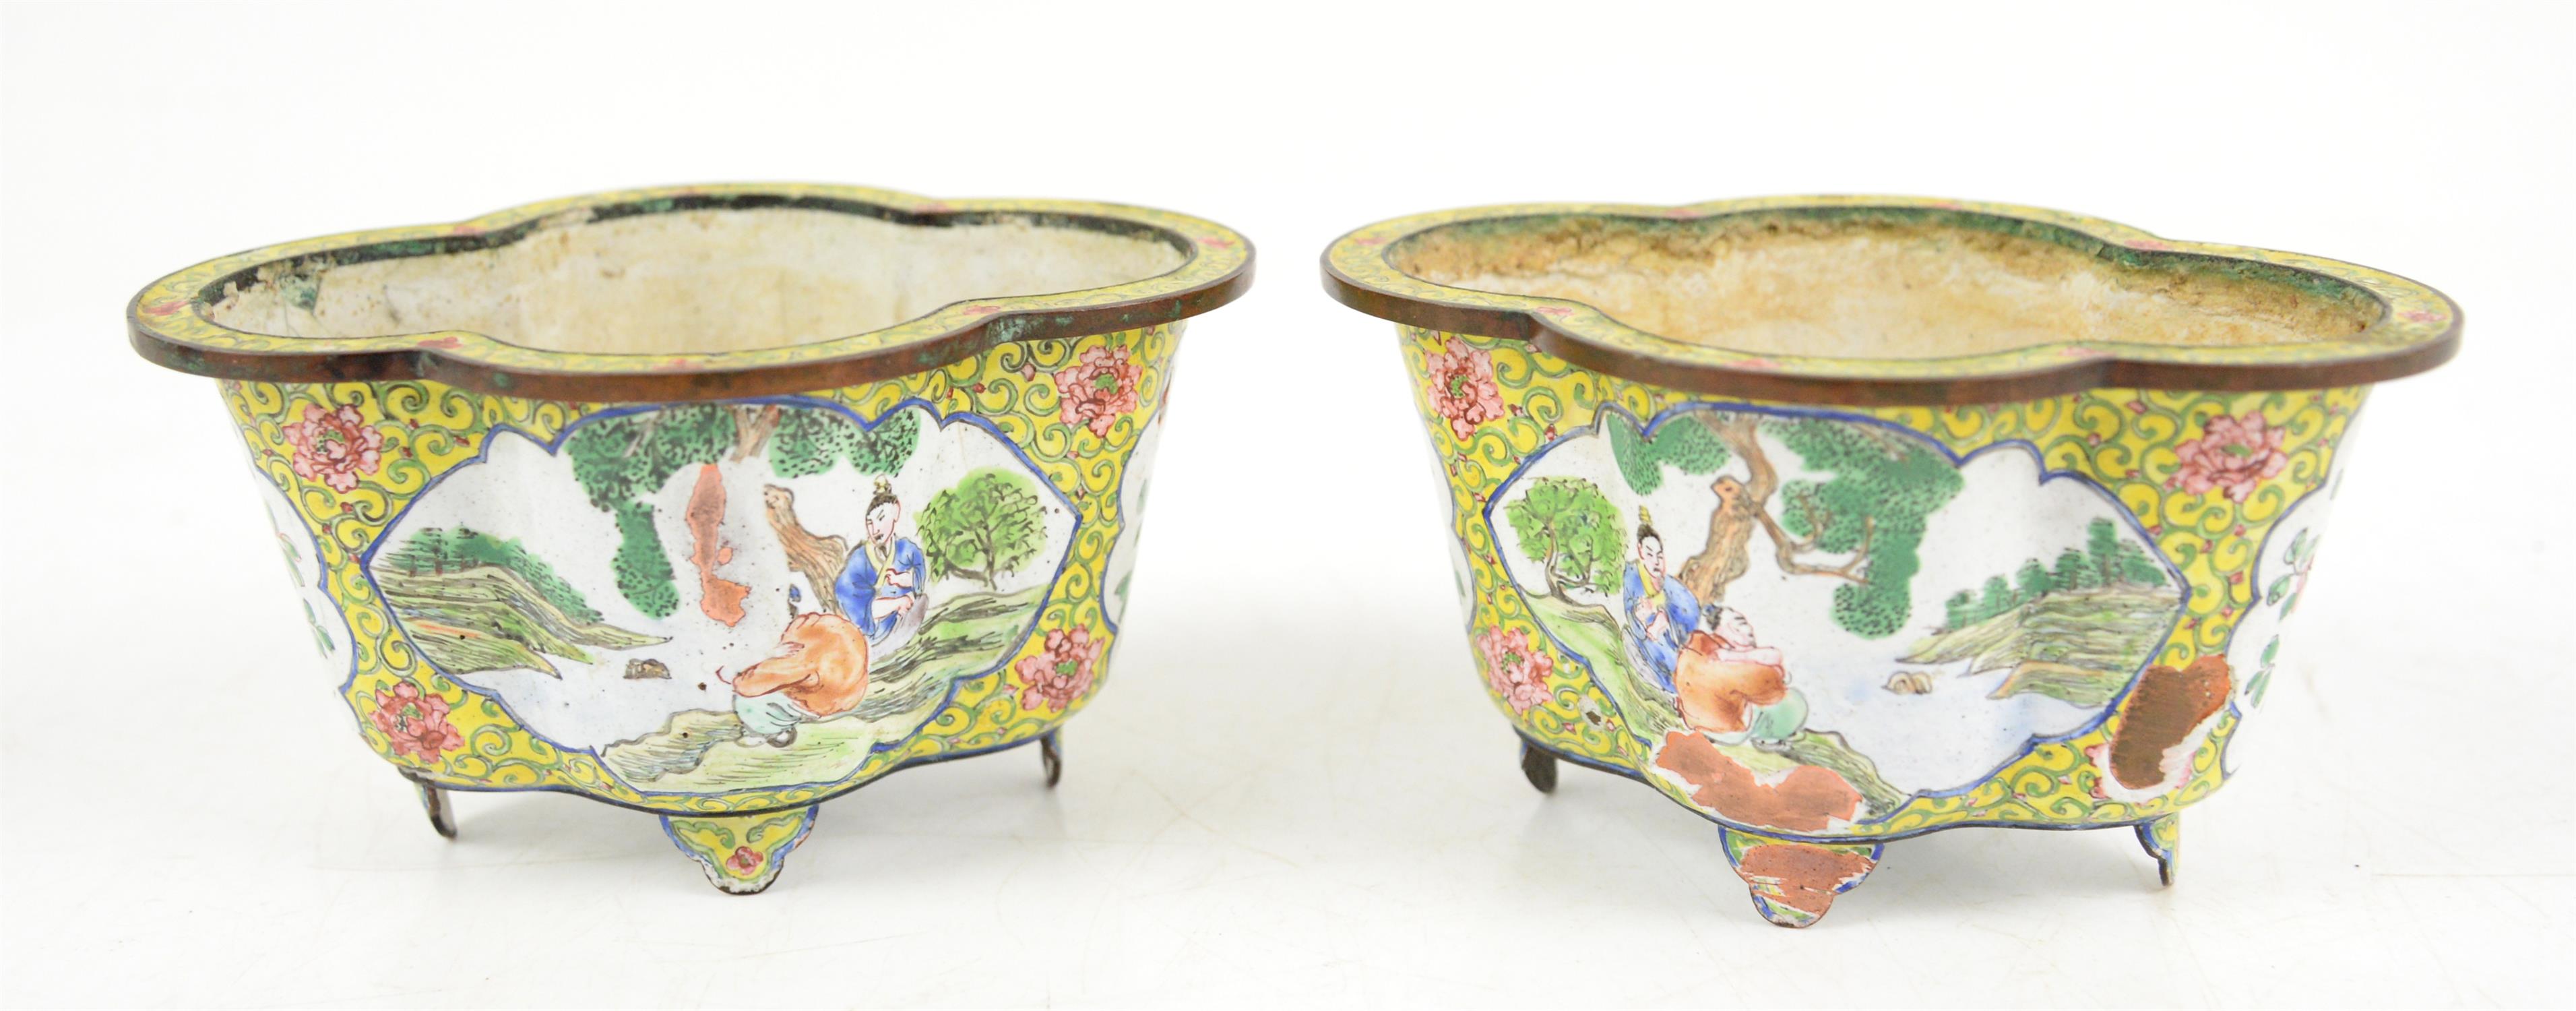 Two Chinese polychrome glazed ceramics figures, 20th century,One sitting scholar reading a - Image 7 of 11